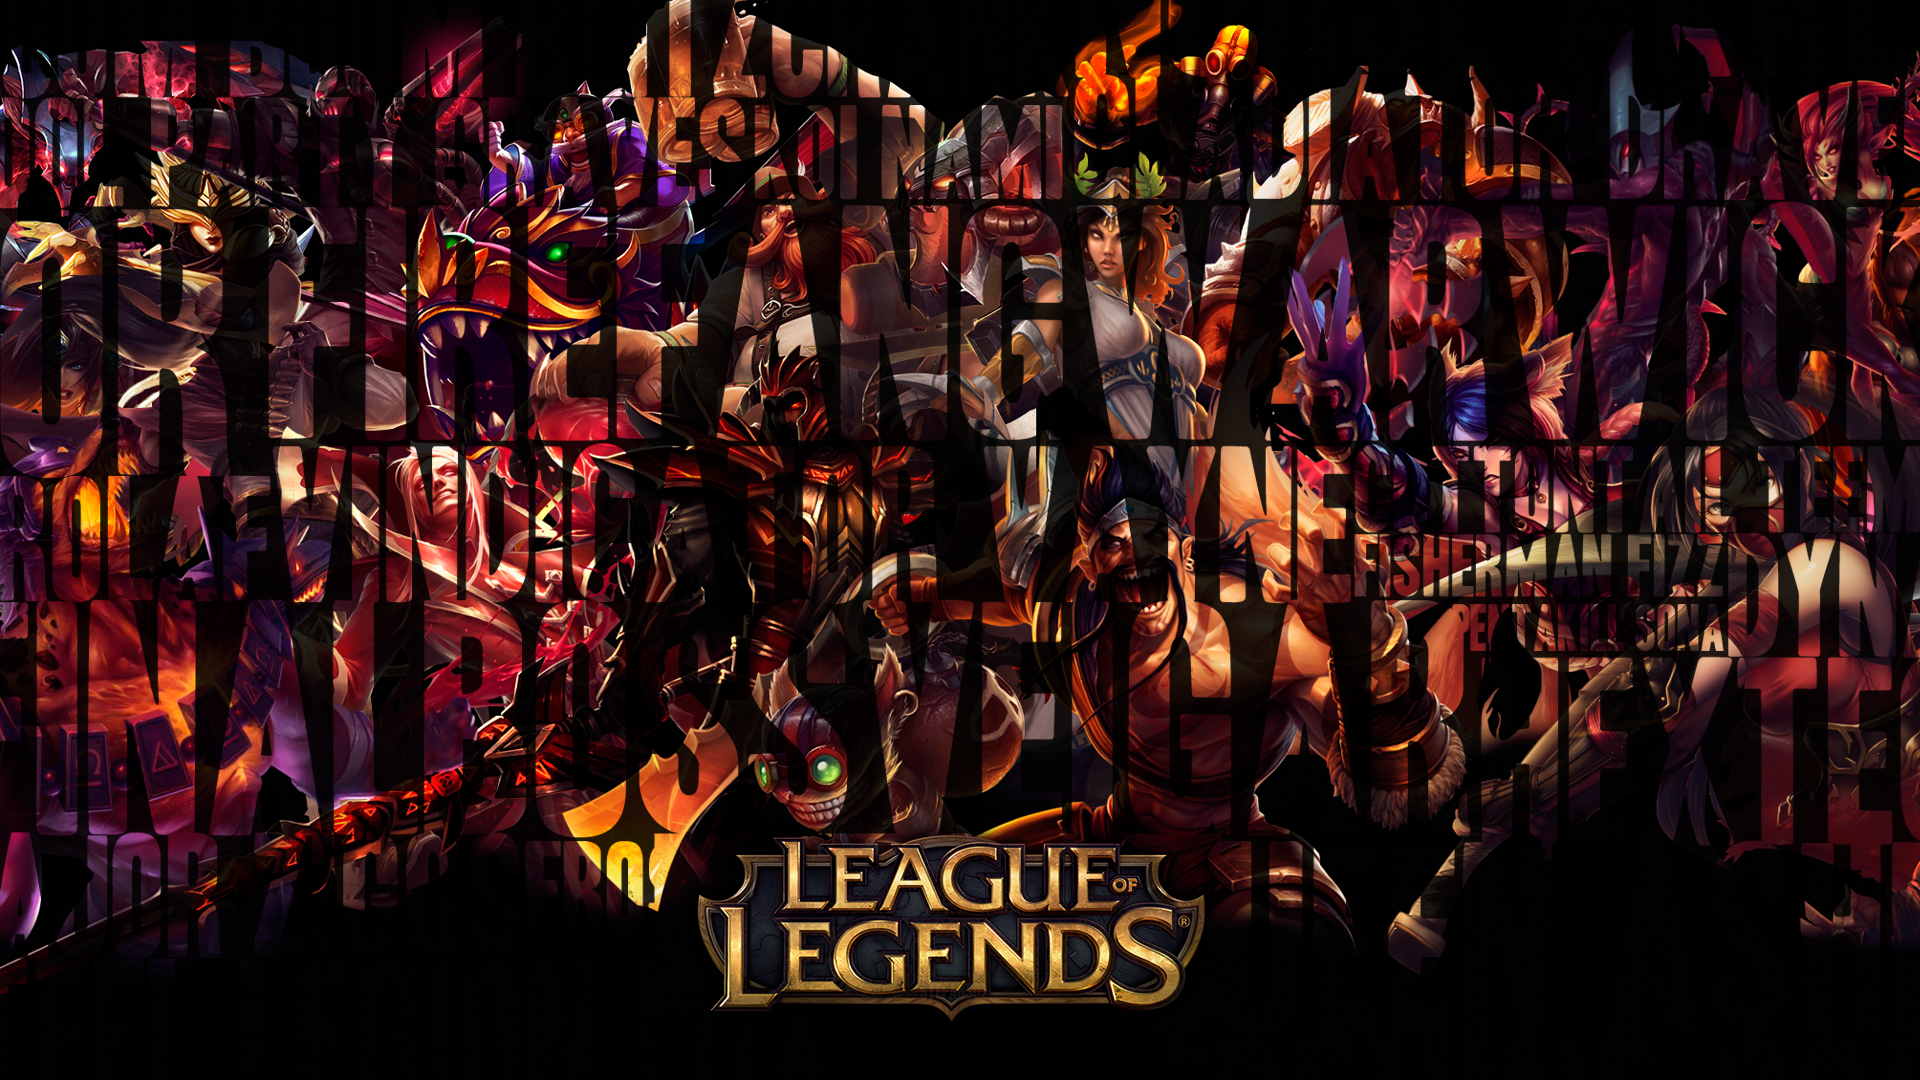 Download League of Legends Online Game HD Wallpaper Search more high 1920x1080